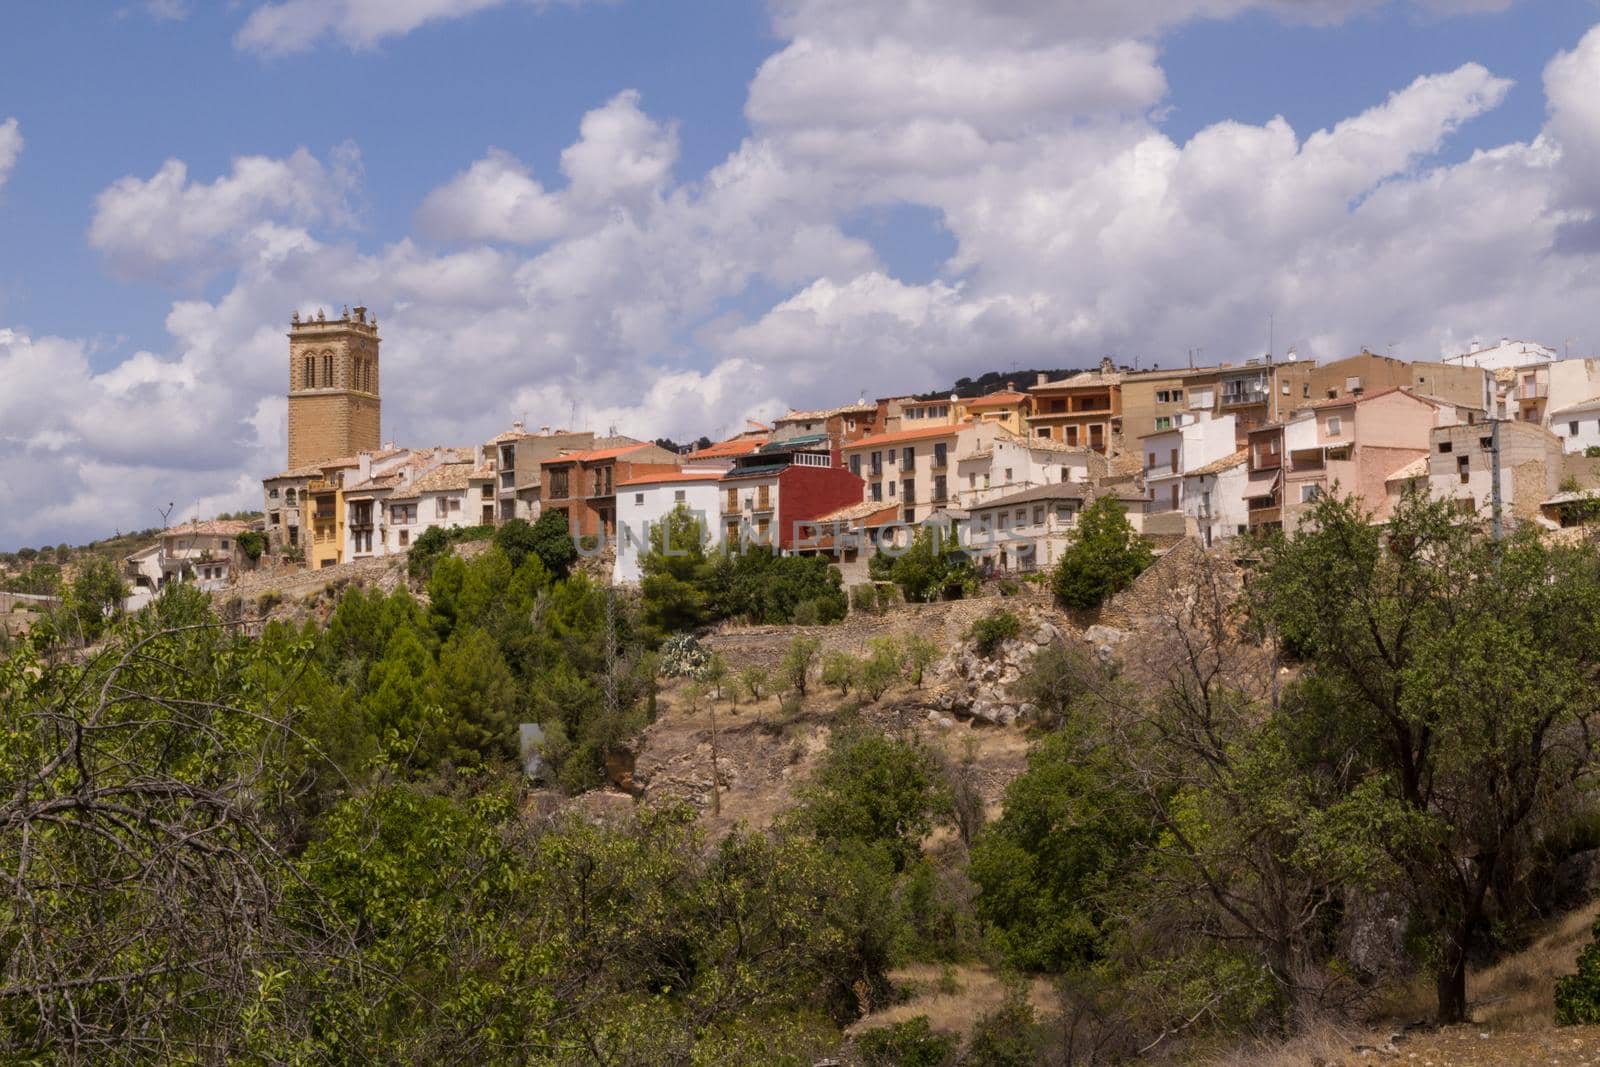 Wide-shot of an old town on a hill with a clock tower on a sunny day